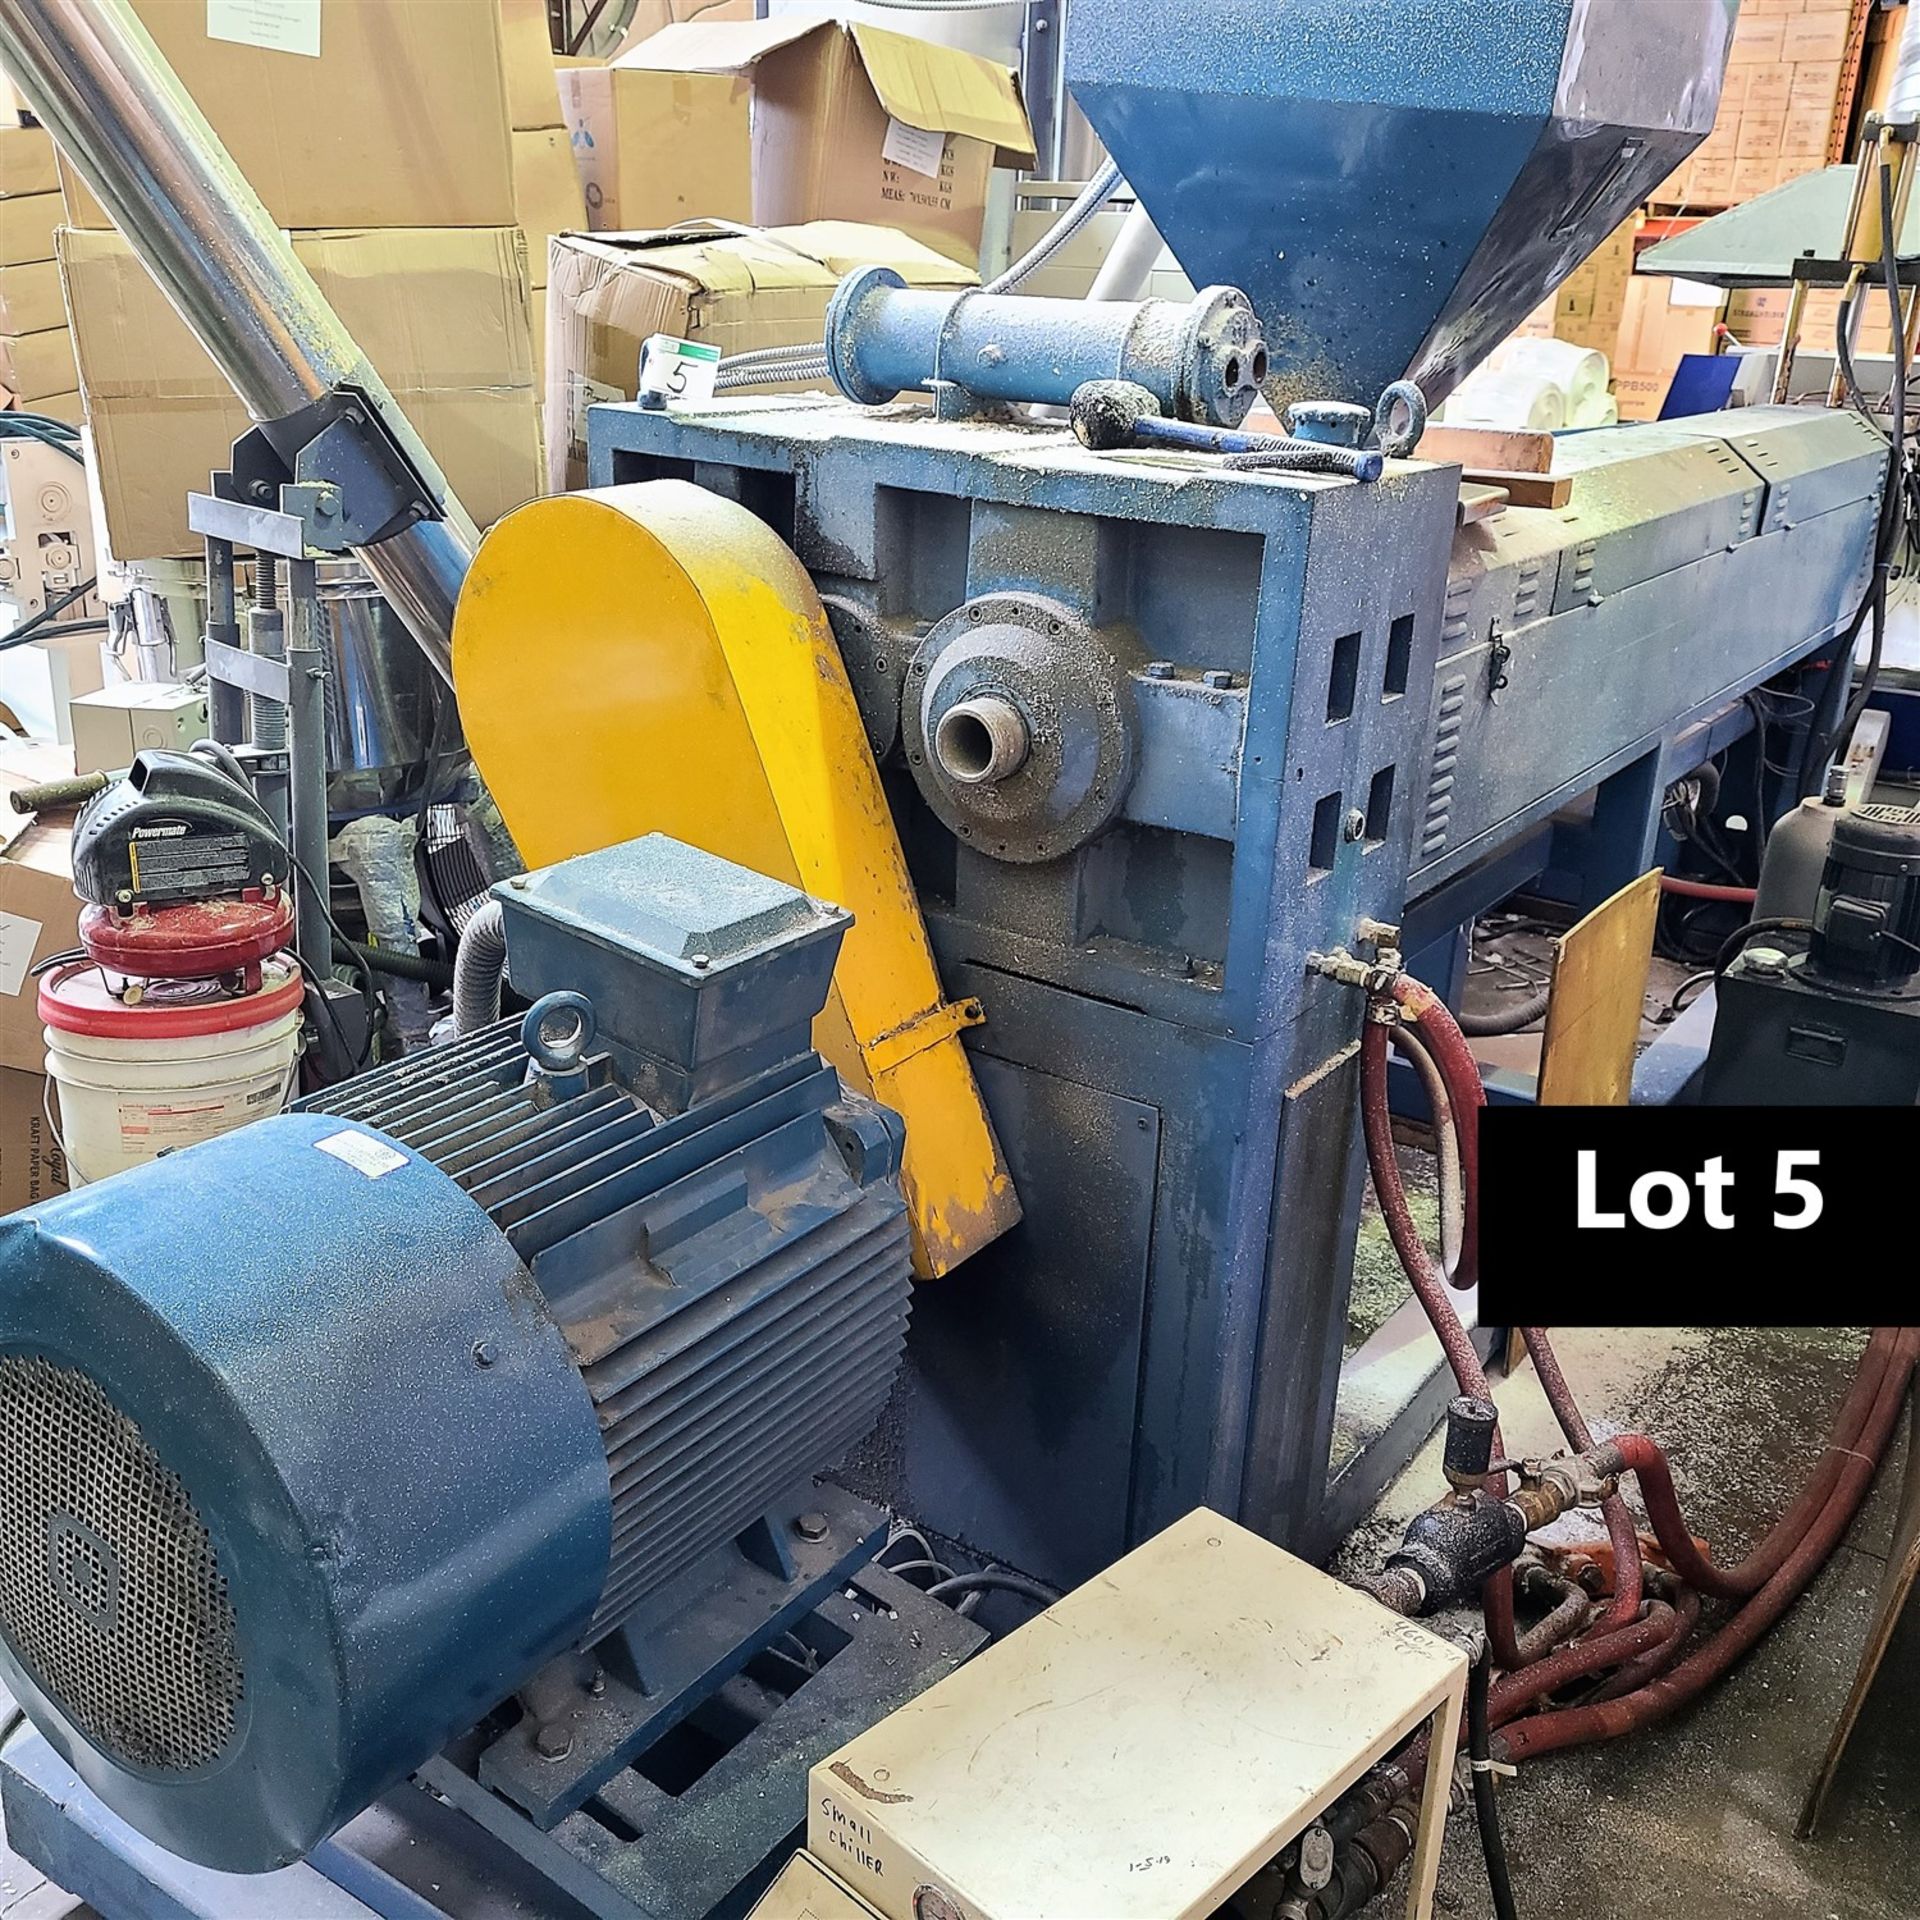 2007 EXTRUDER W/4 IN. BARREL, 380V/3 PH, 980 RPM, 45 KW, 36 IN. MAX WIDTH SHEET SIZE DIE, CONTROL